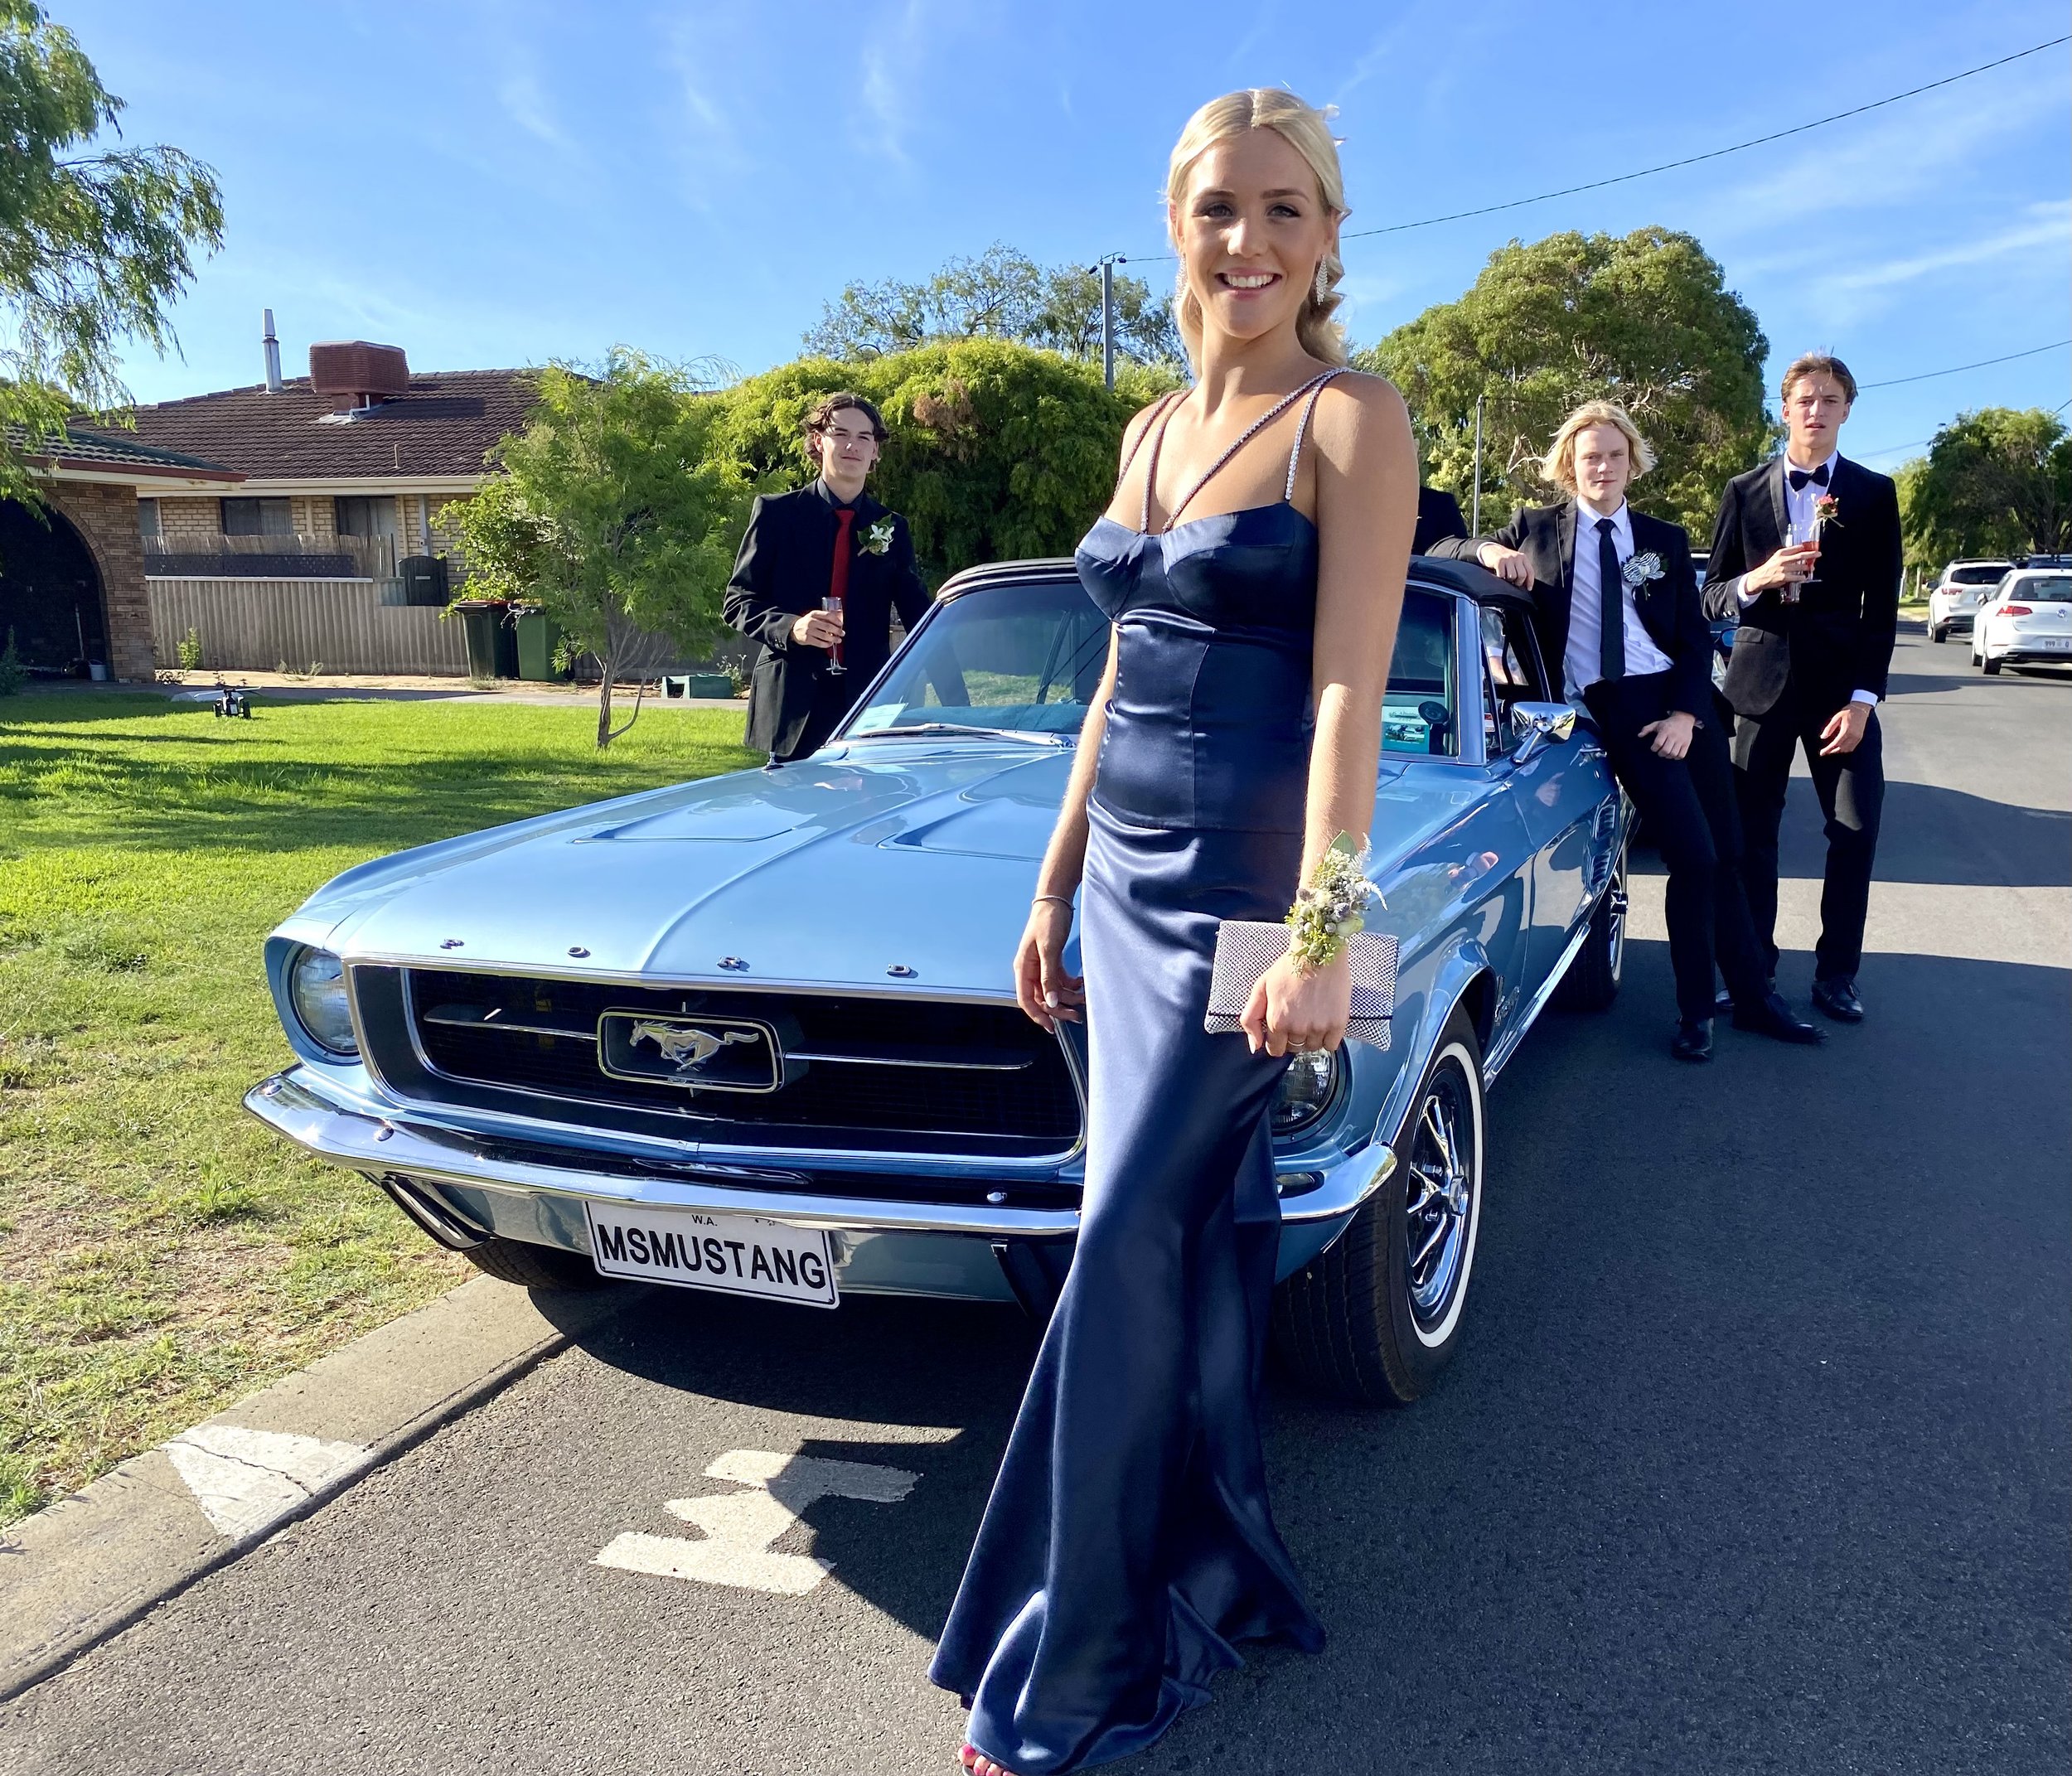 GMAS school ball 2022-mr mustang hire-classic car hire-busselton-palmers winery9.JPG